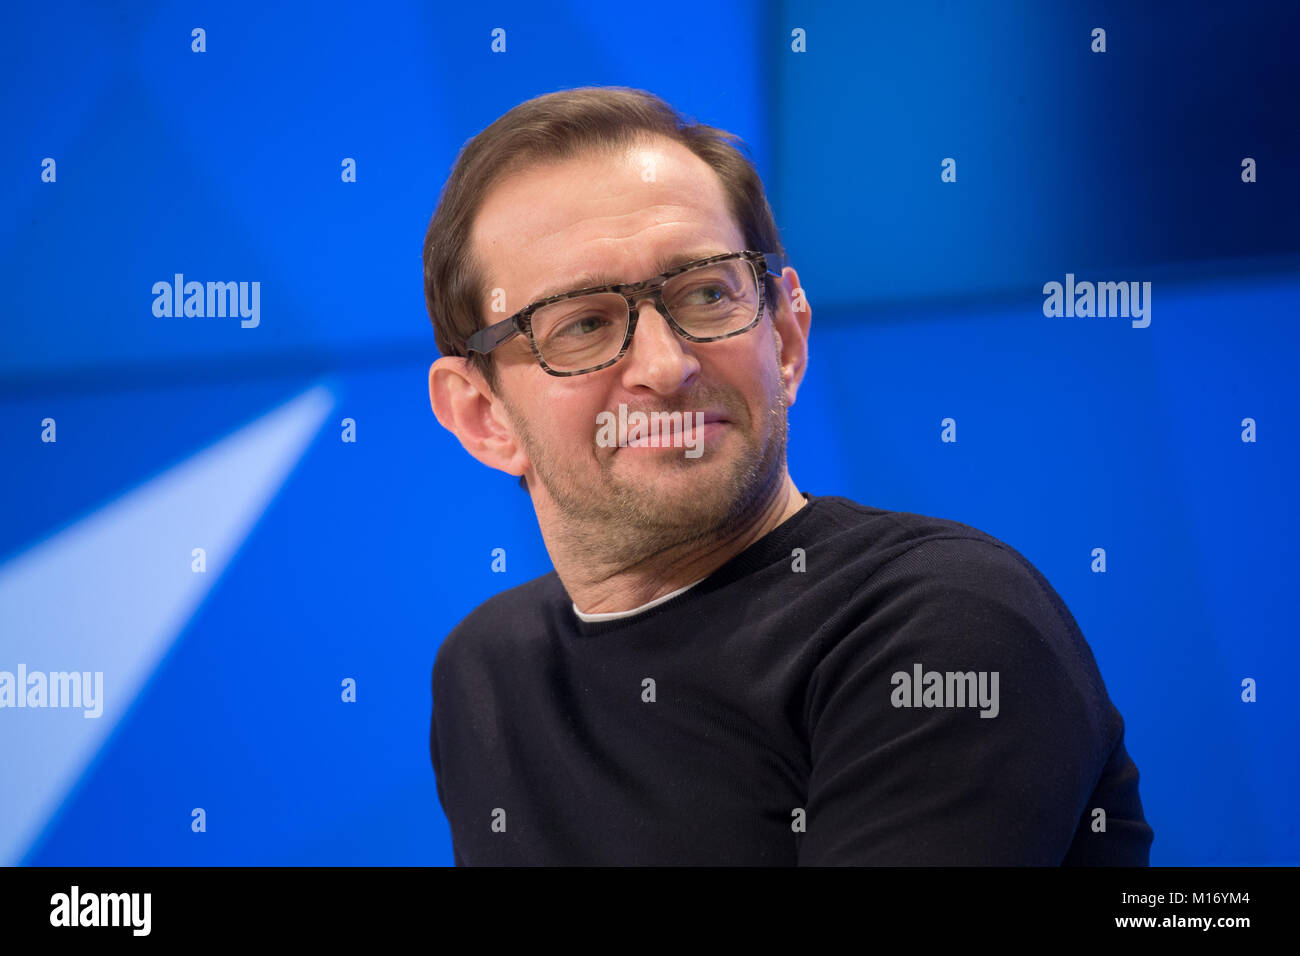 Moscow, Russia. 25th January, 2018. Actor Konstantin Khabensky at a news conference ahead of the press-preview of the Selfie film at the Rossiya Segodnya news agency's international multimedia press center. Credit: Victor Vytolskiy/Alamy Live News Stock Photo